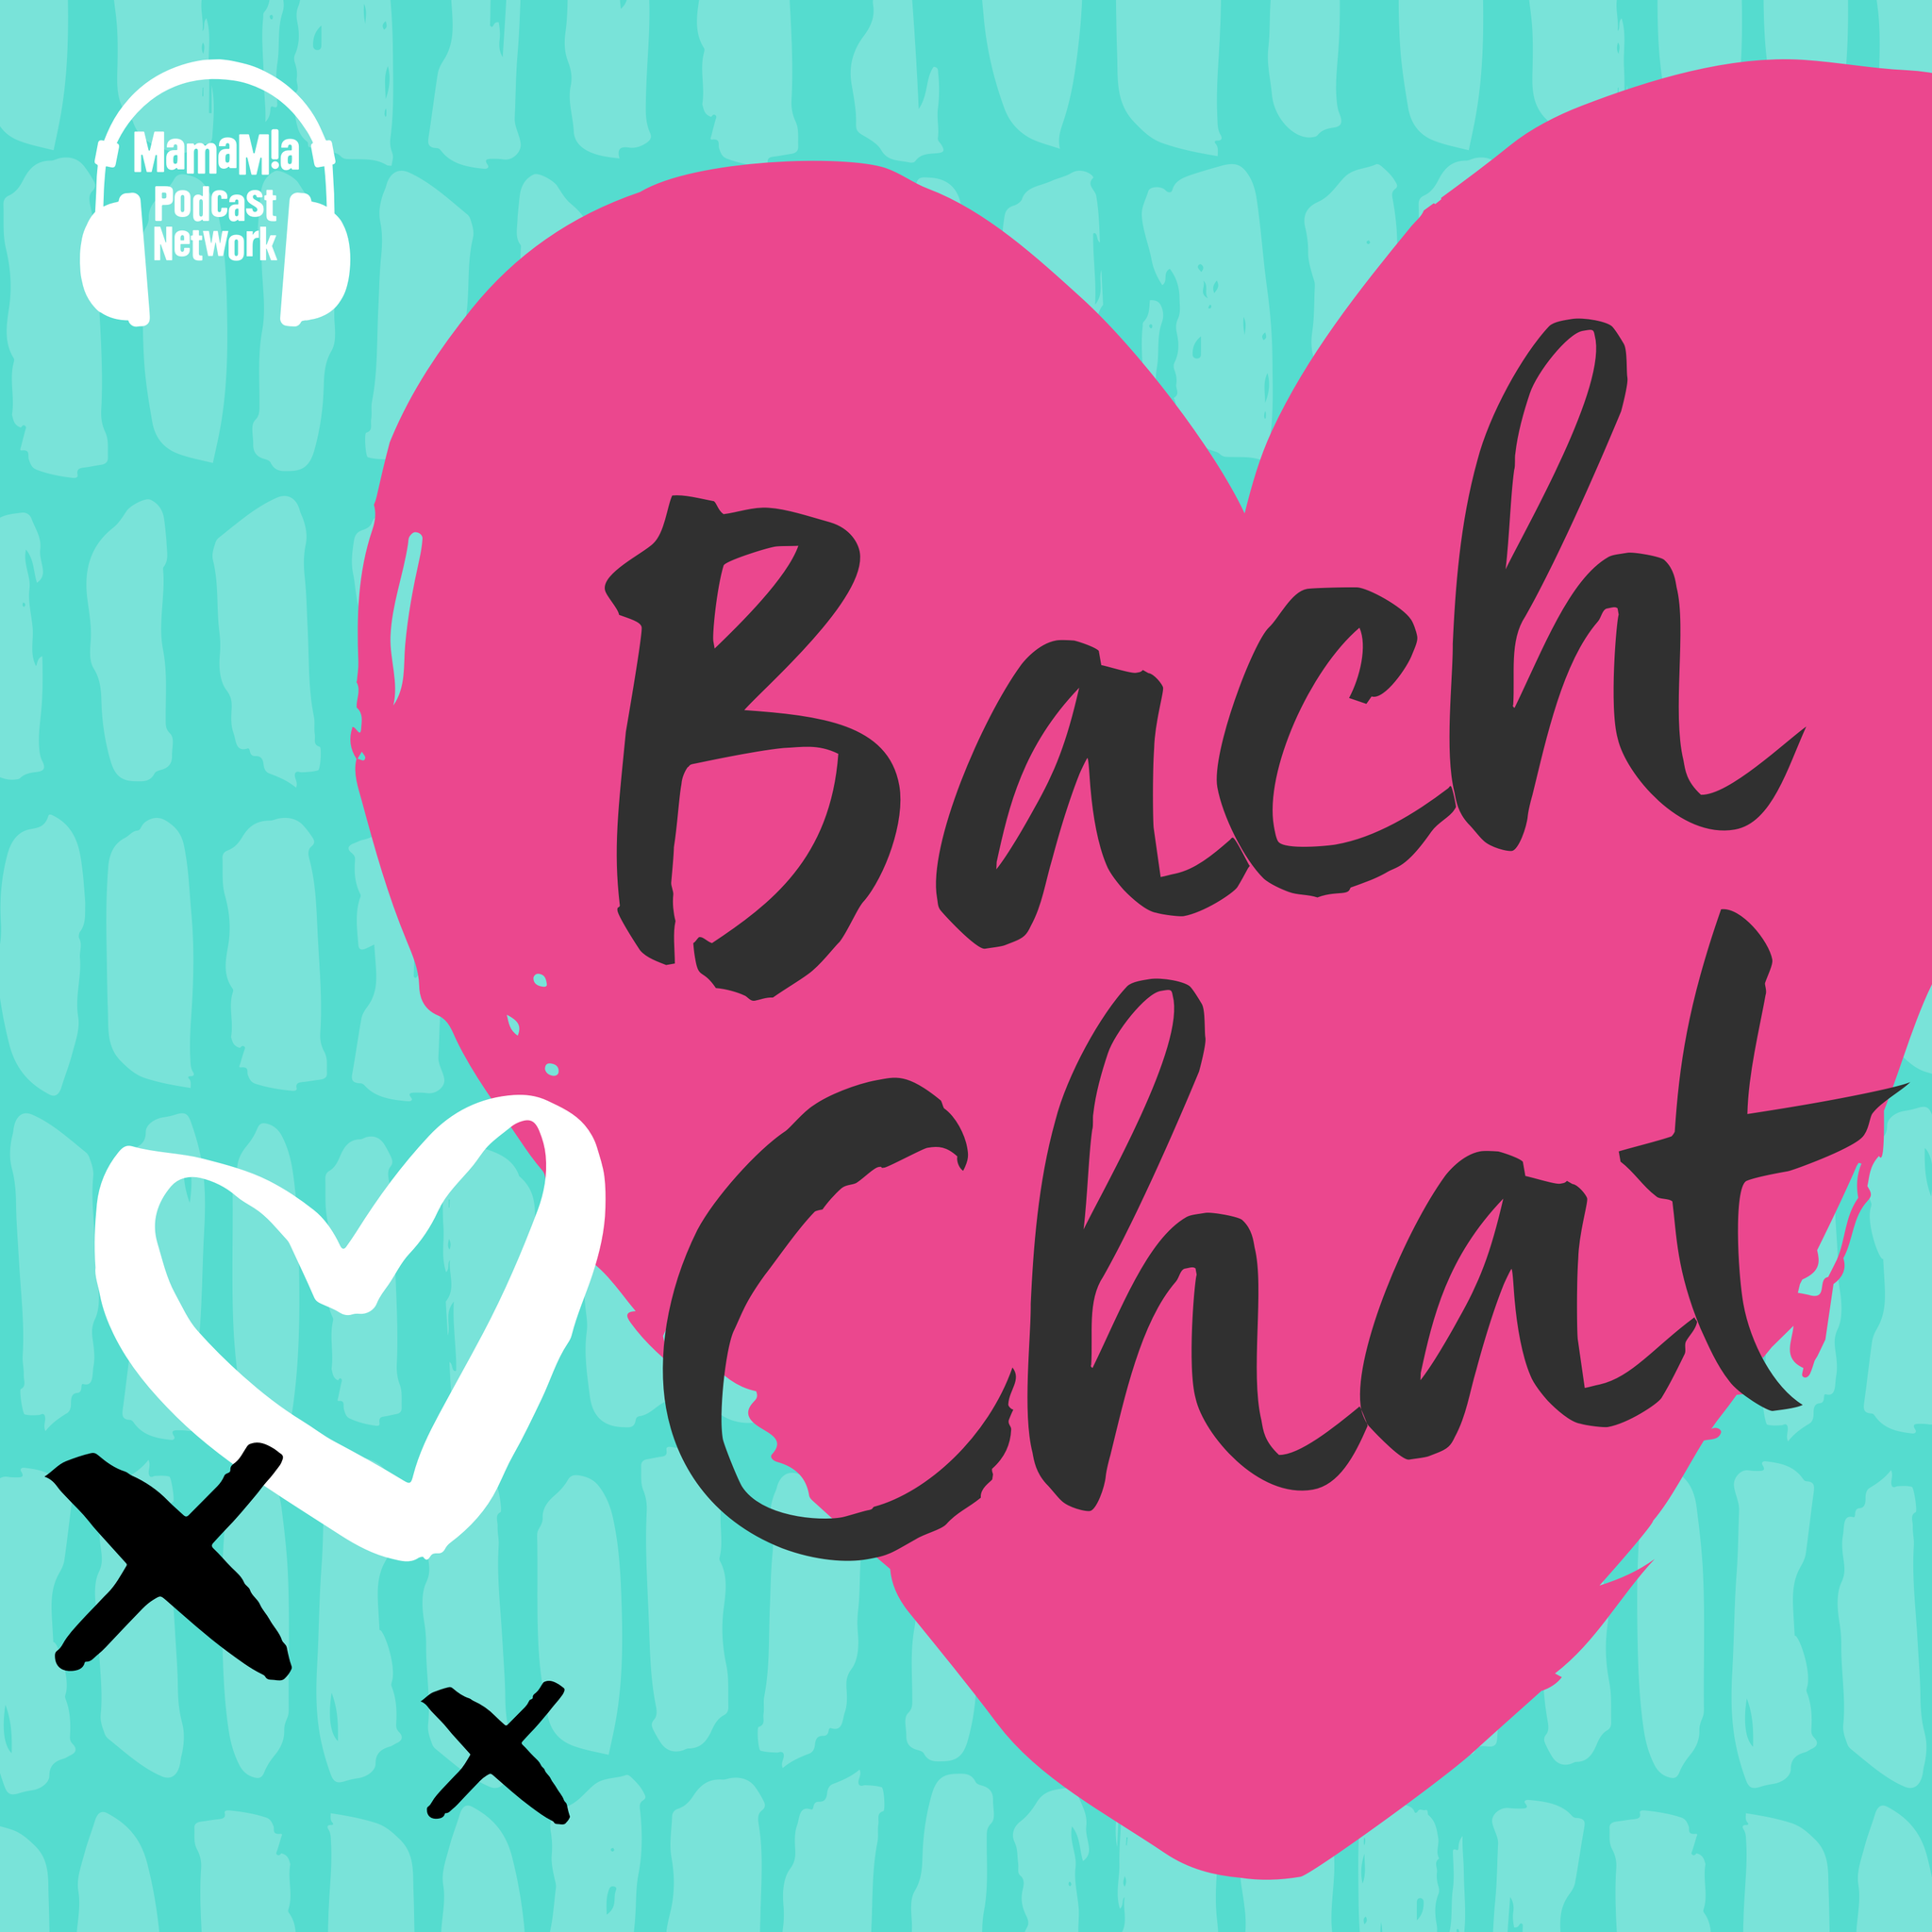 Bach Chat #10: Where the Heck Was George?